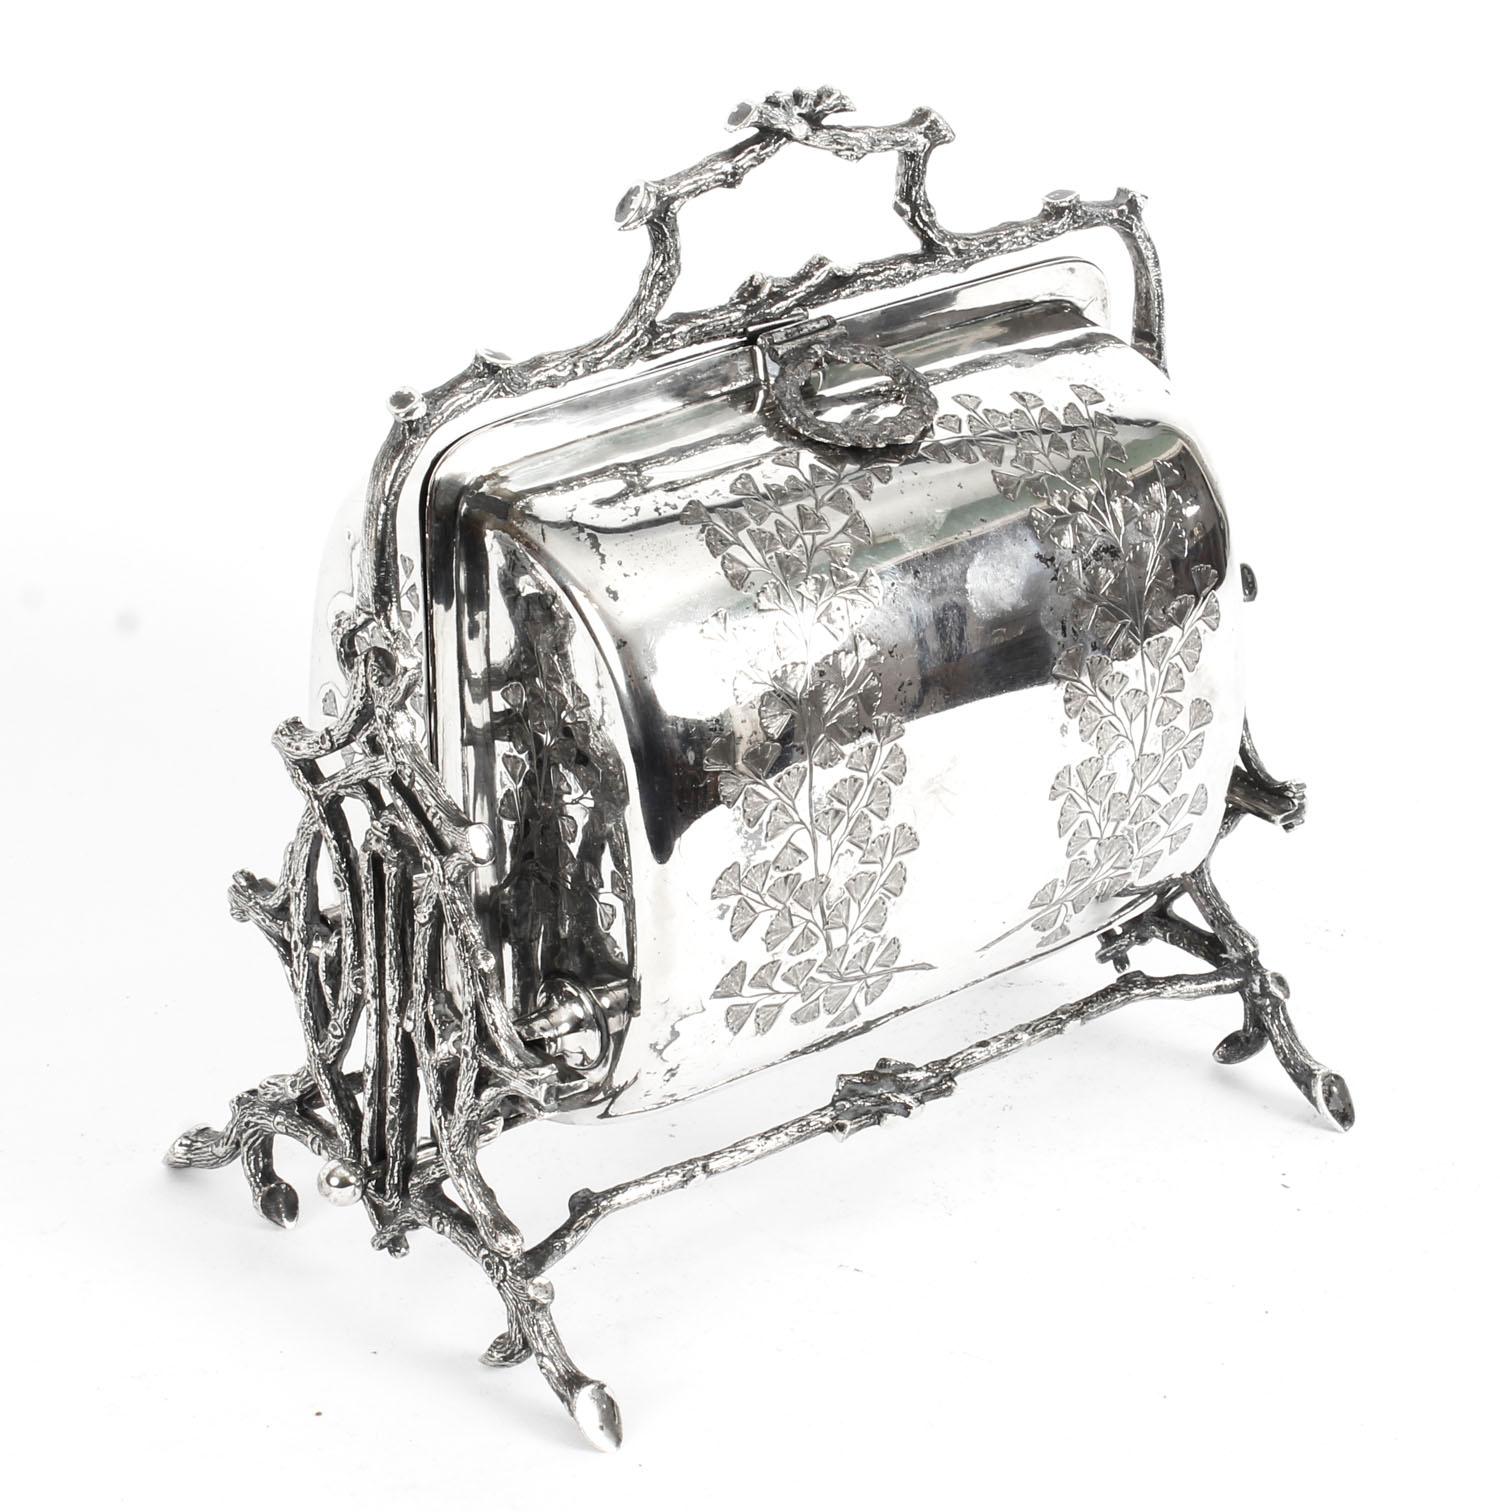 Antique English Silver Plated Folding Sweets Biscuit Box, 19th Century 11